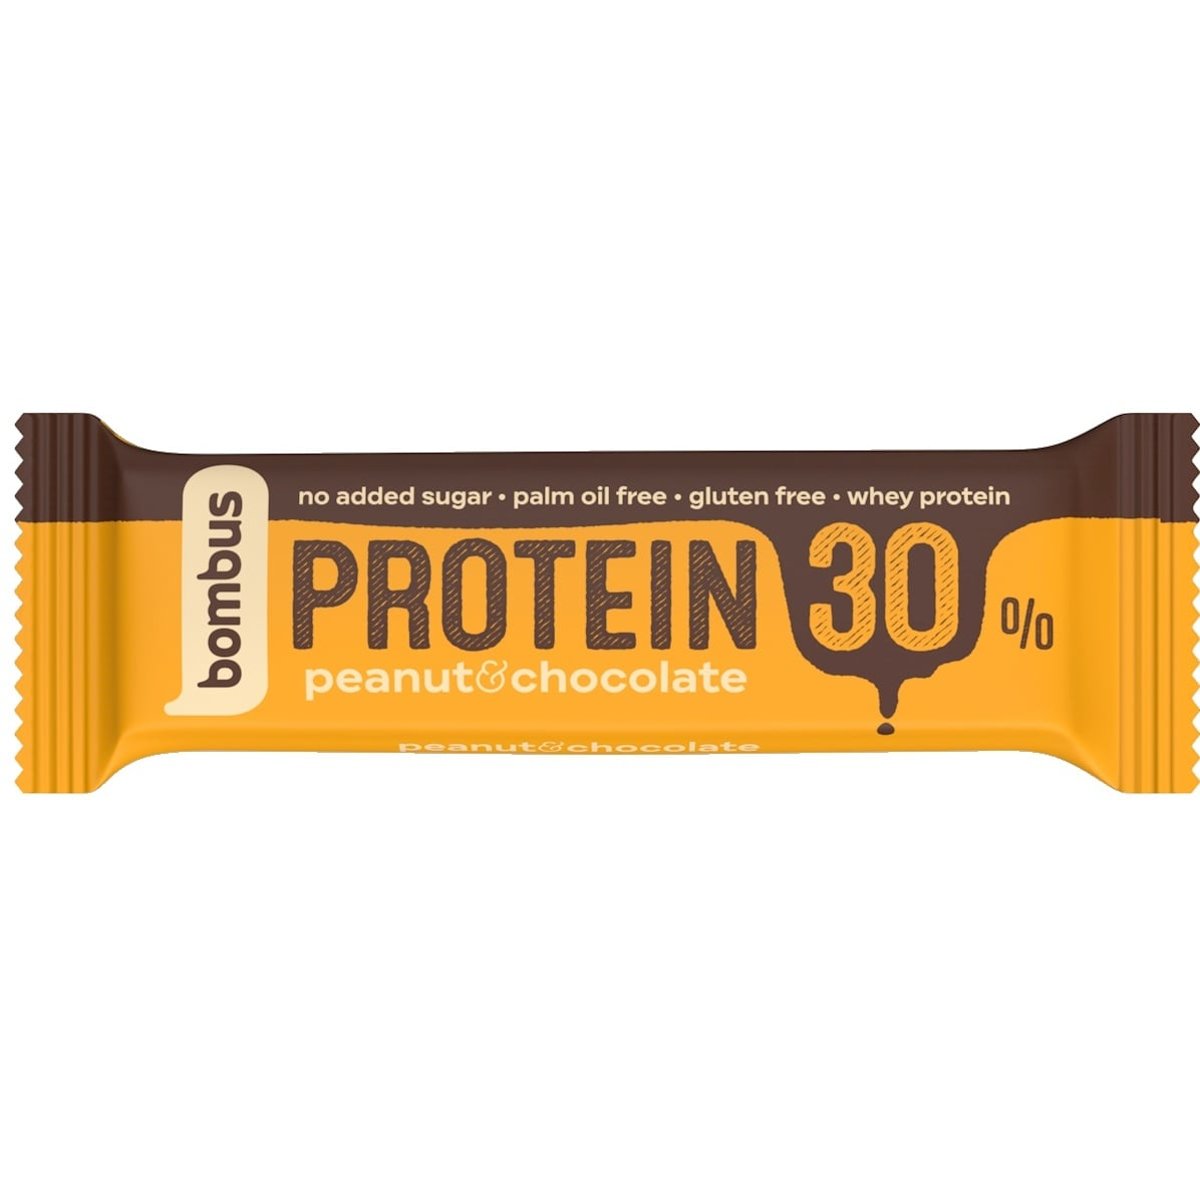 Bombus Protein 30% peanuts a chocolate